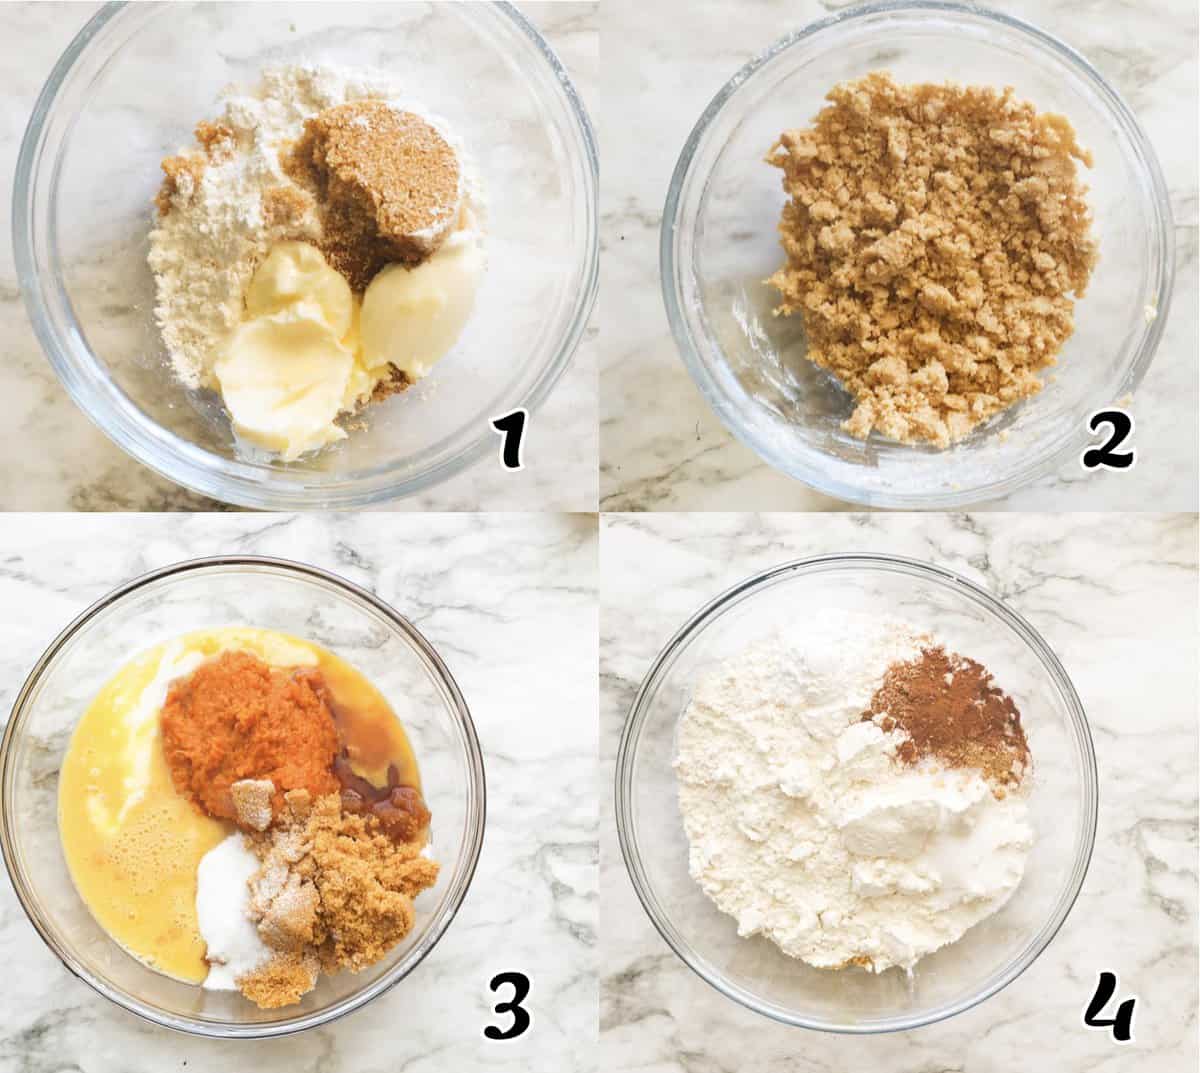 Make the streusel and mix wet and dry ingredients separately